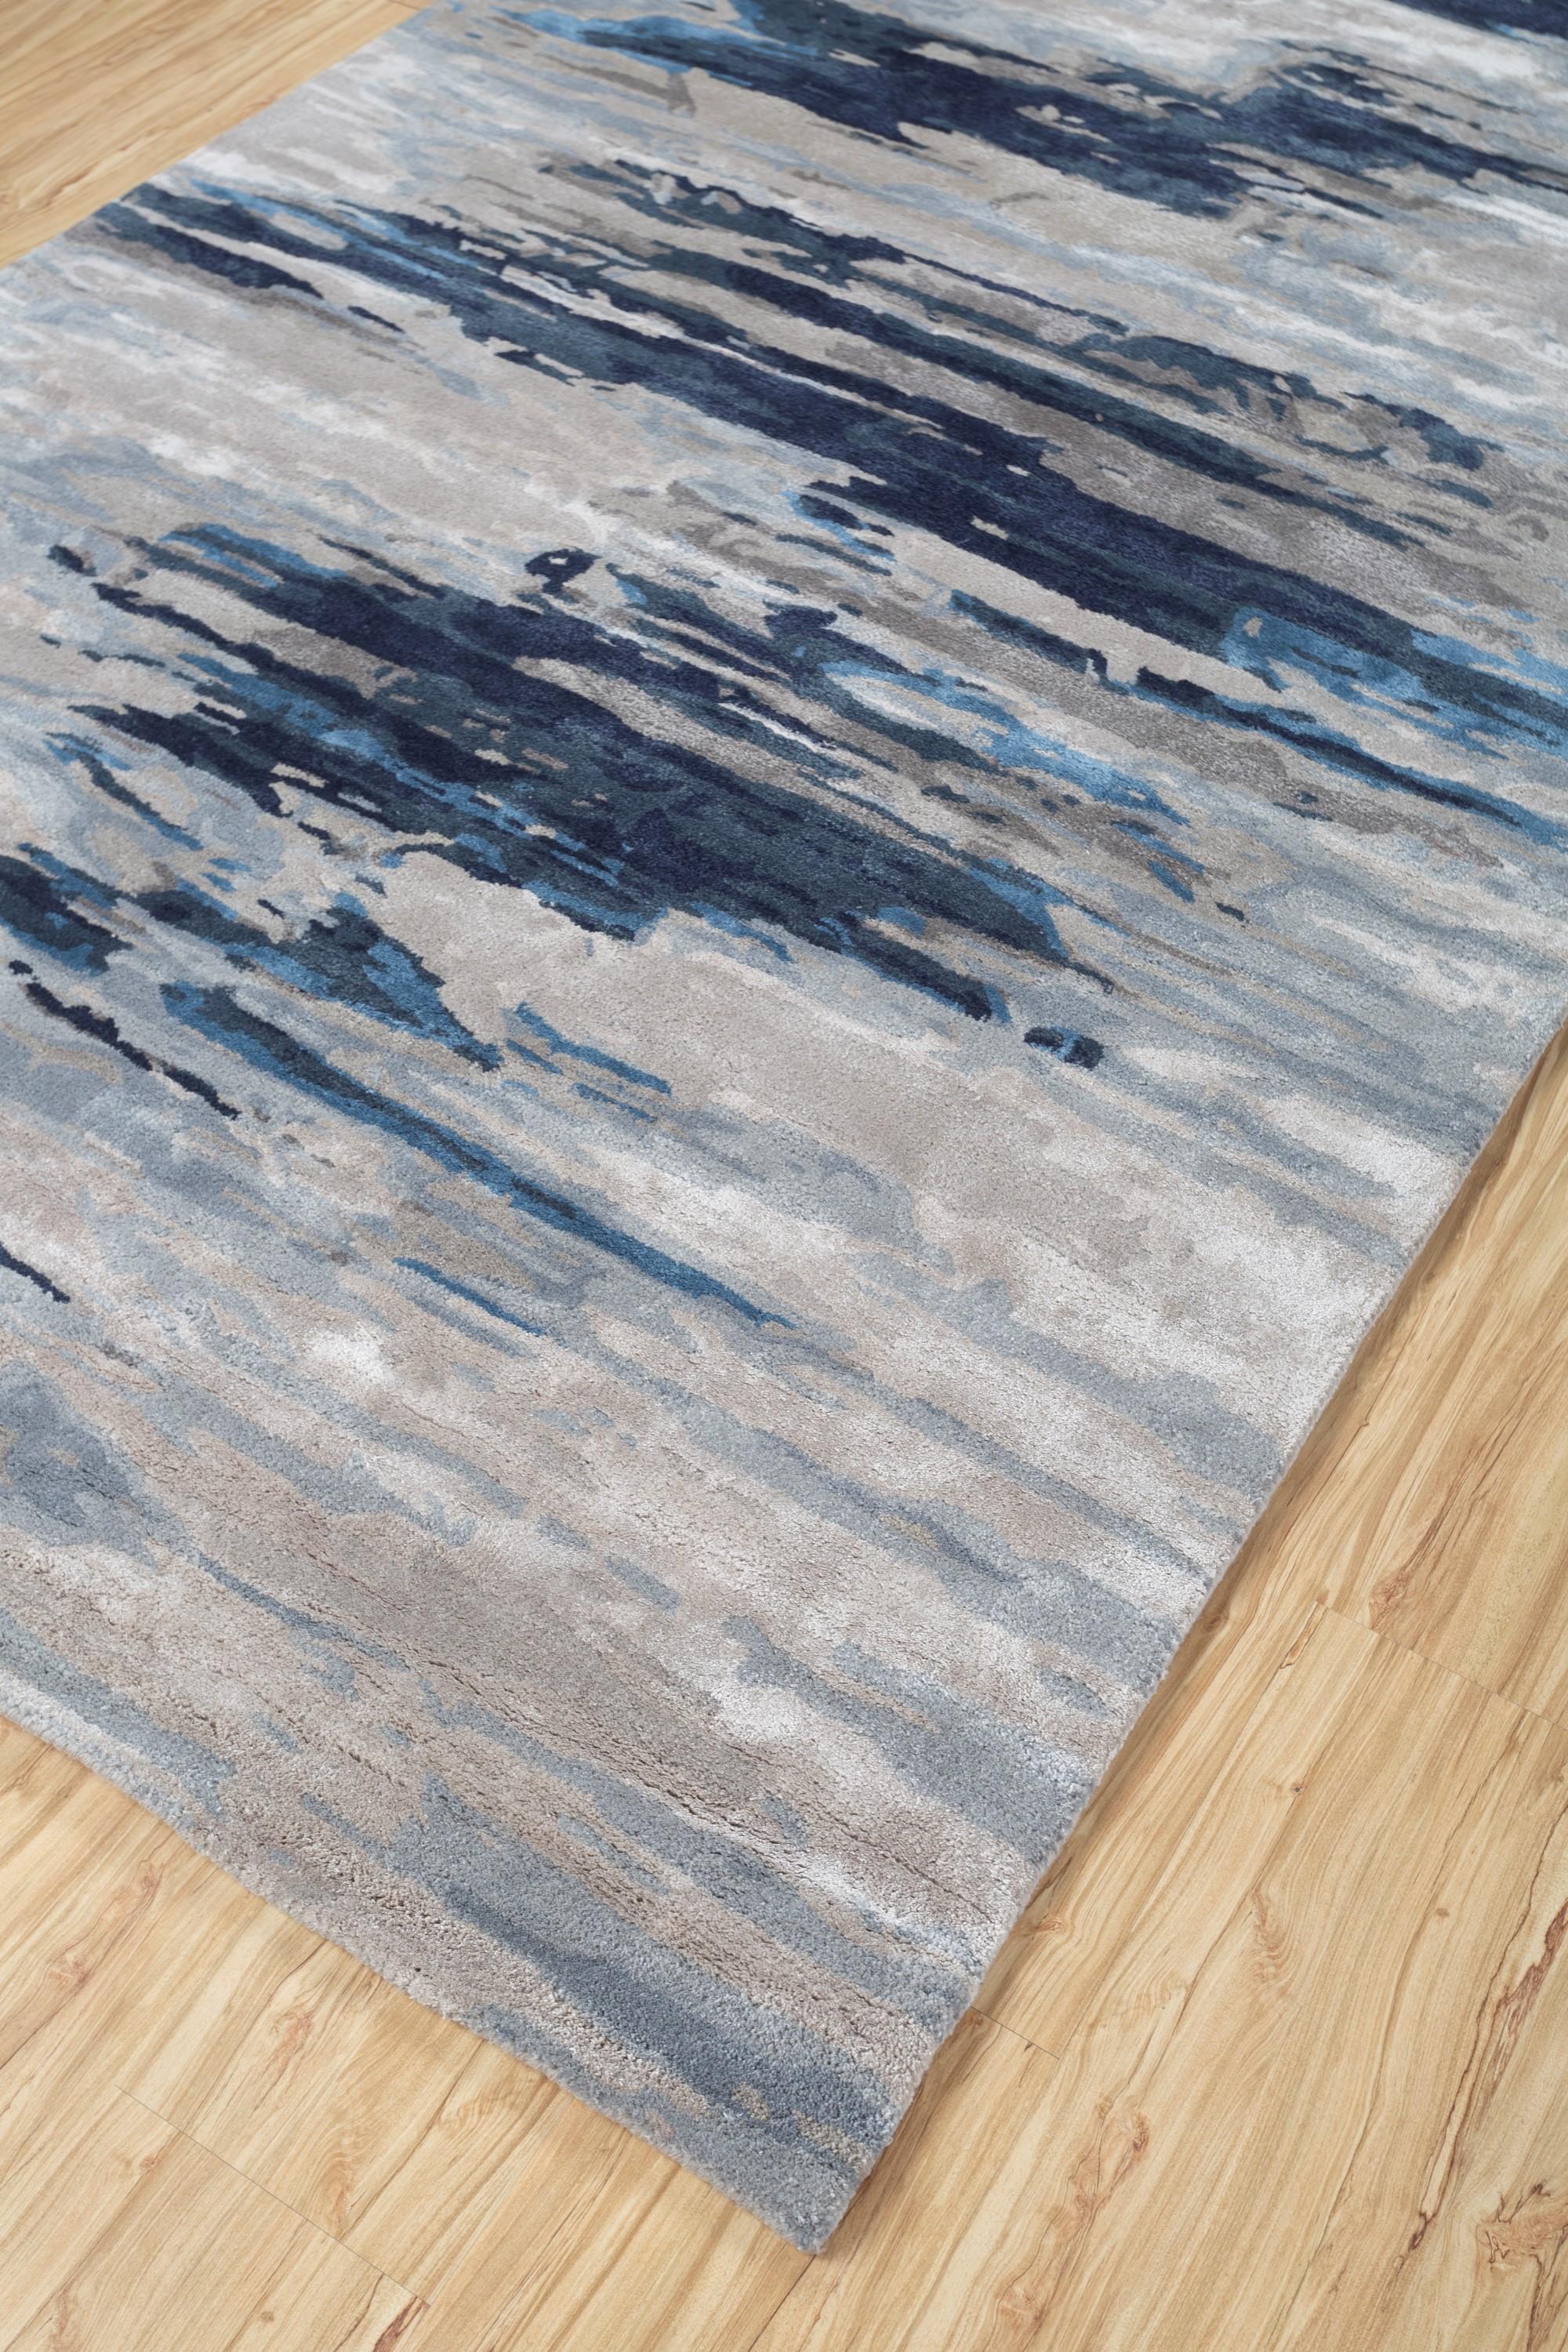 Imagine the cosmos unfolding beneath your feet with our Modern Hand-Tufted Rug, a celestial masterpiece reminiscent of a painting. The ethereal pastel hues blend like cosmic brushstrokes against the ashwood background, while indigo-blue borders